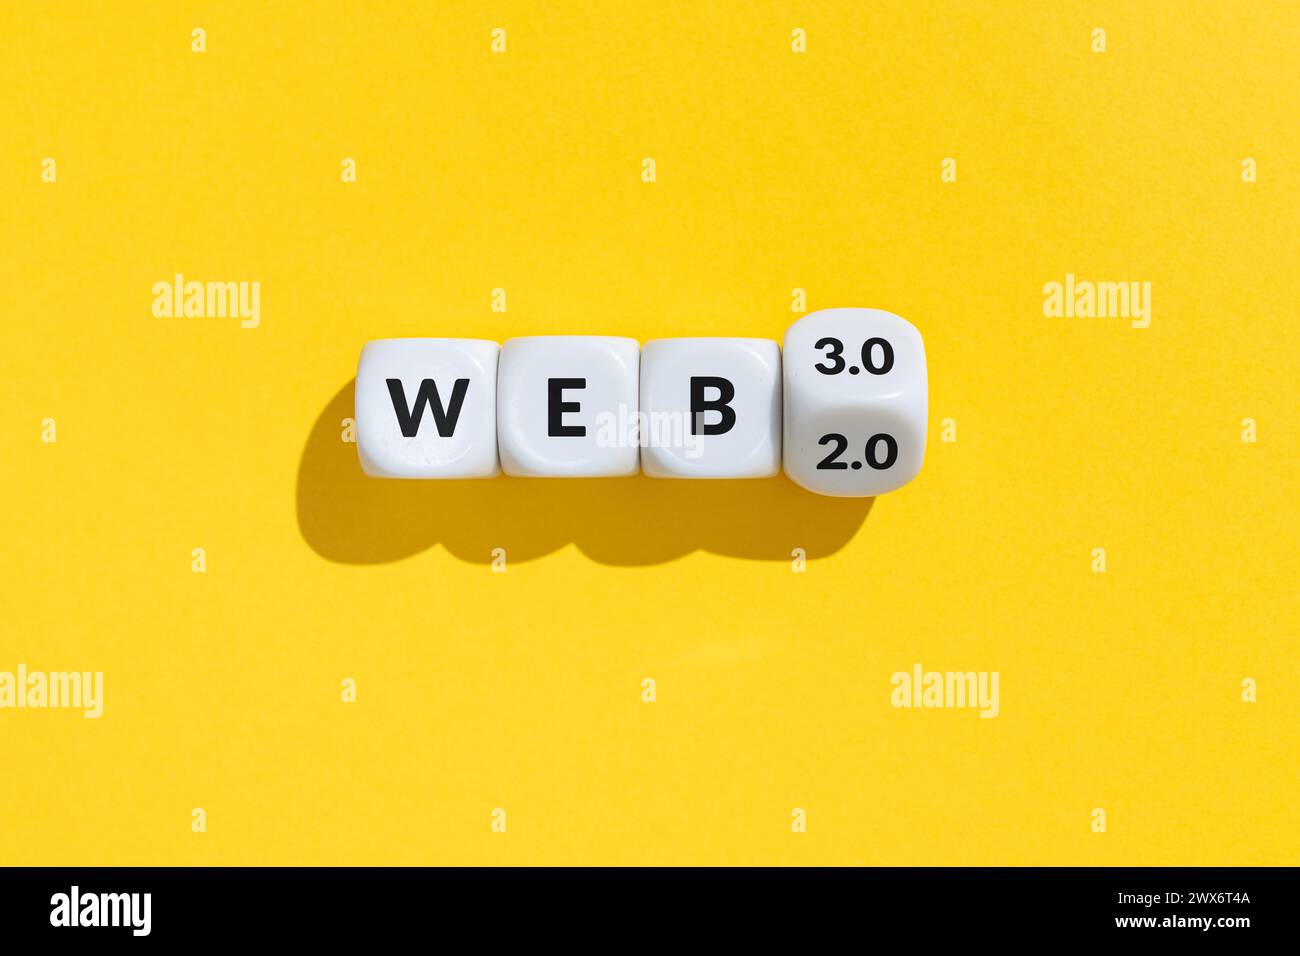 From web 2 to web 3 concept. Cube blocks with text isolated on yellow background Stock Photo